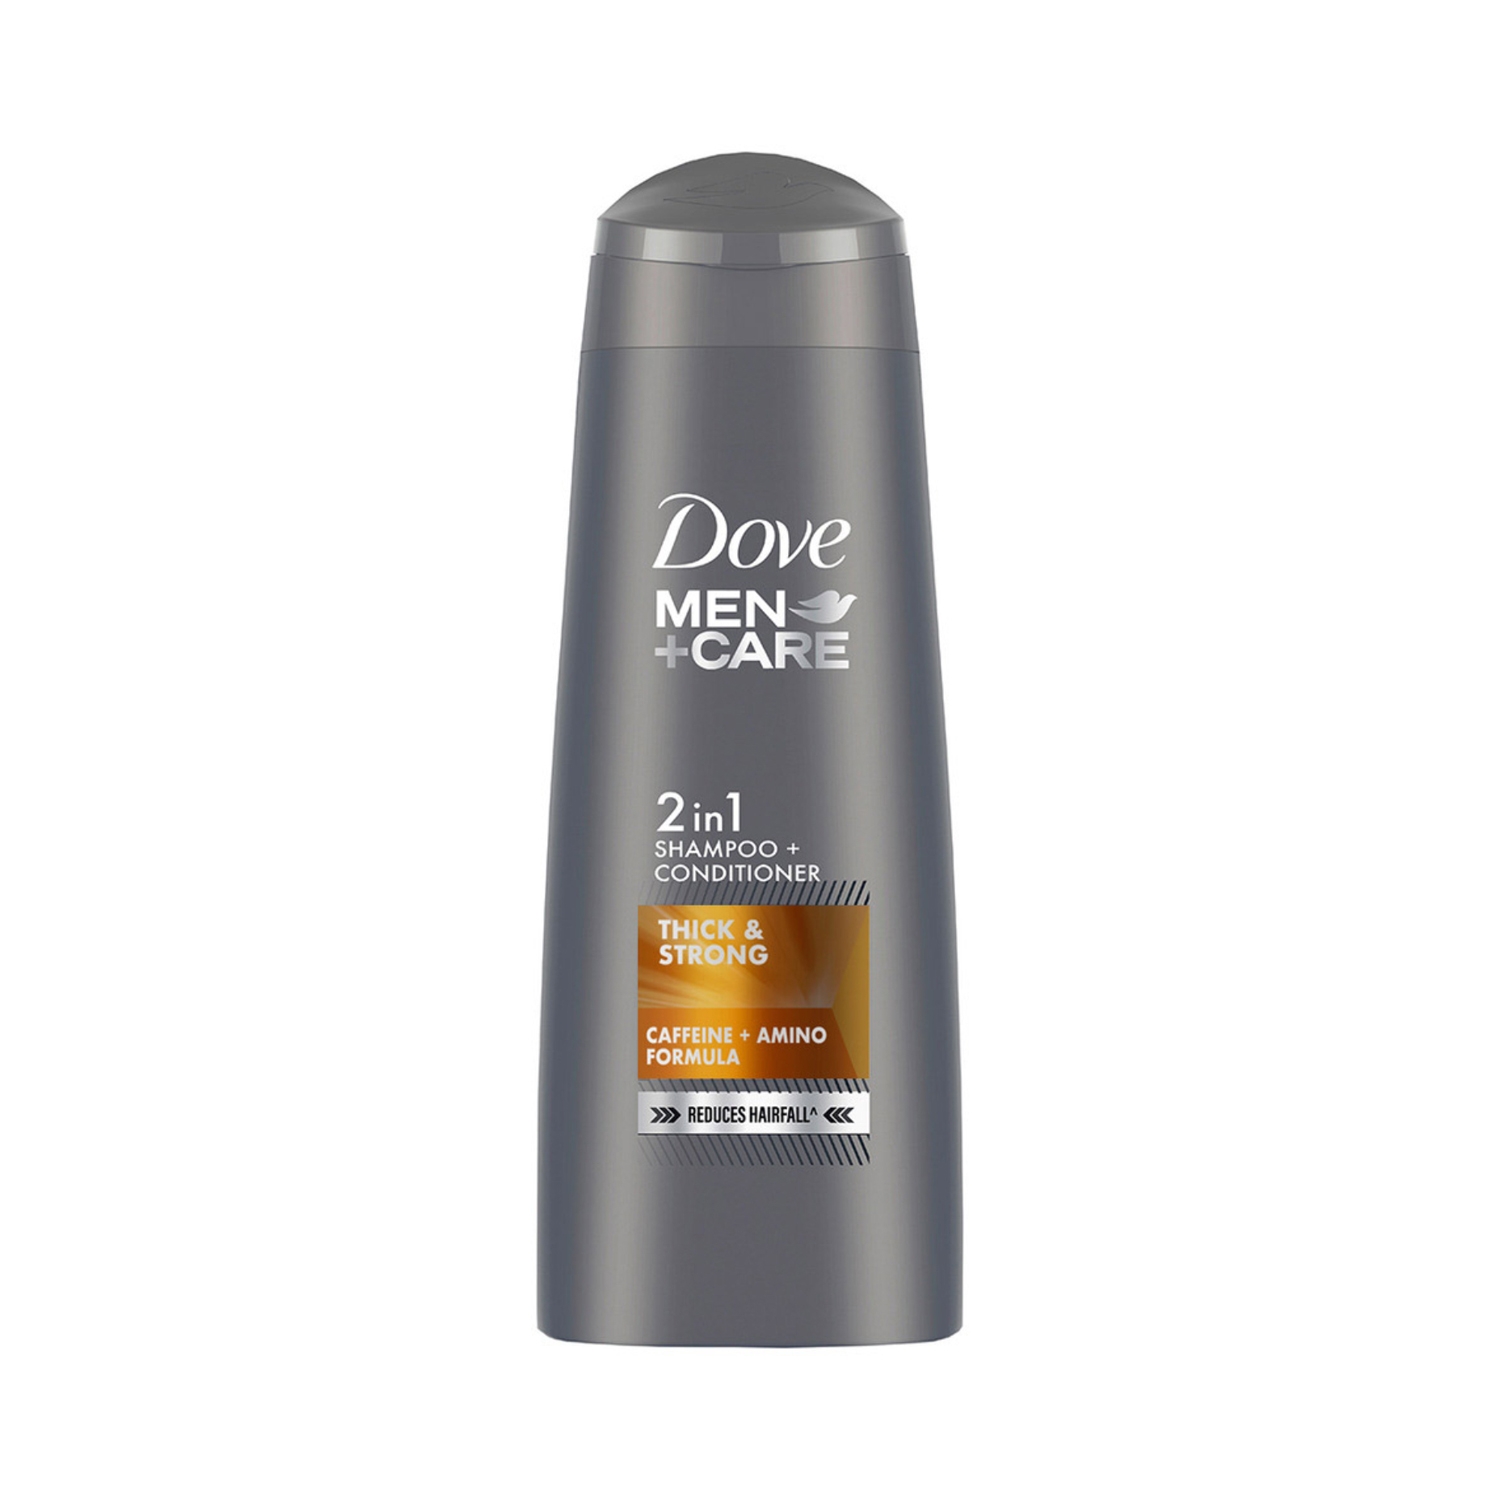 Dove Men+Care Thick & Strong 2 In 1 Shampoo + Conditioner (180ml)